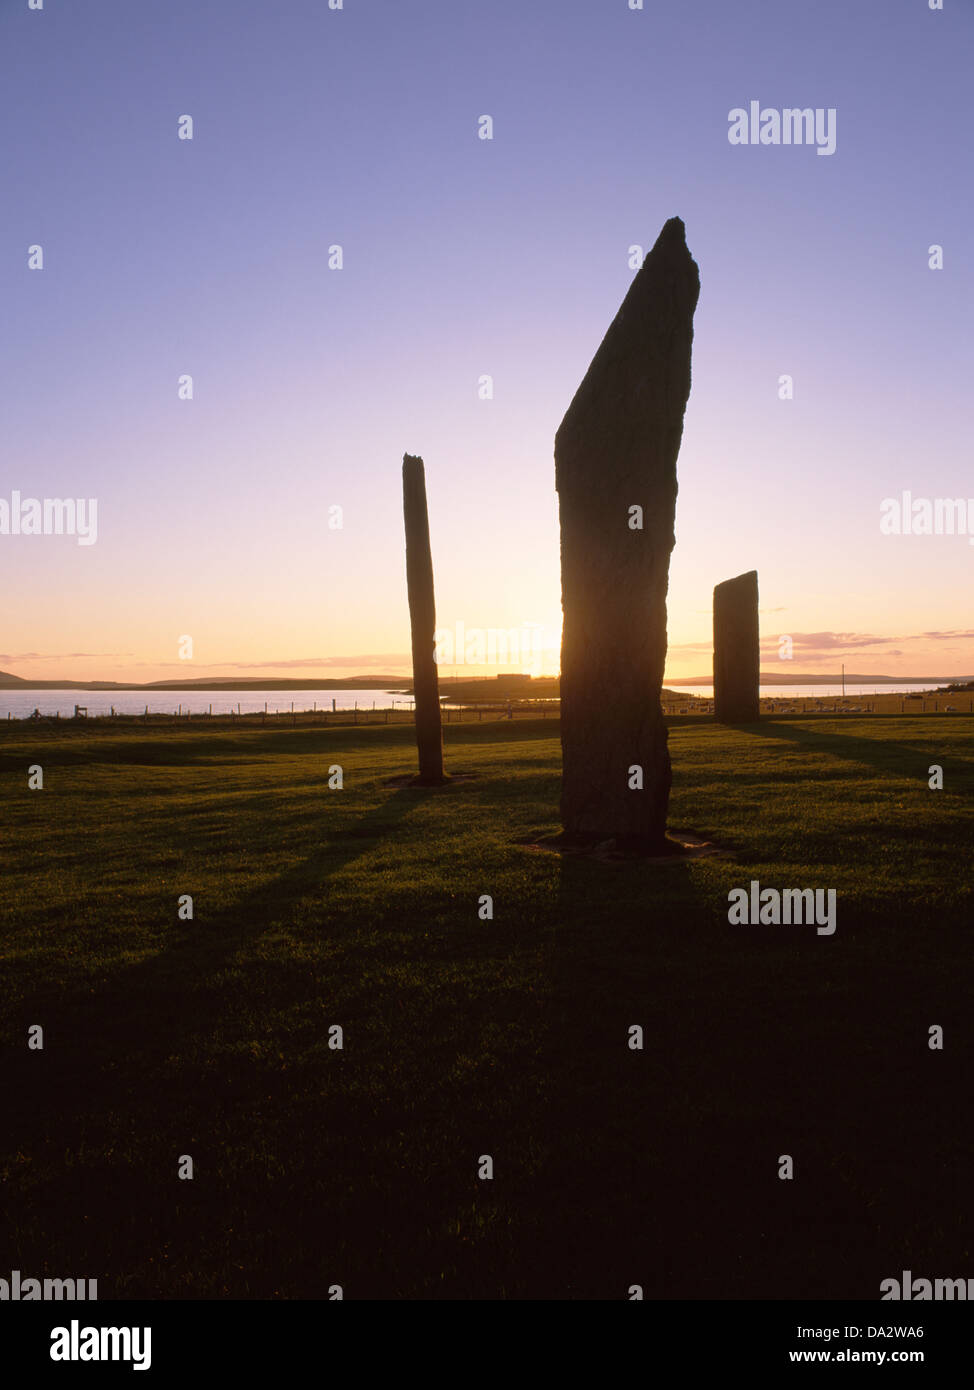 Looking NW at the Stones of Stenness stone circle, Mainland, Orkney, backlit by the setting sun. Ness of Brodgar, Lochs Stenness & Harray to rear. Stock Photo